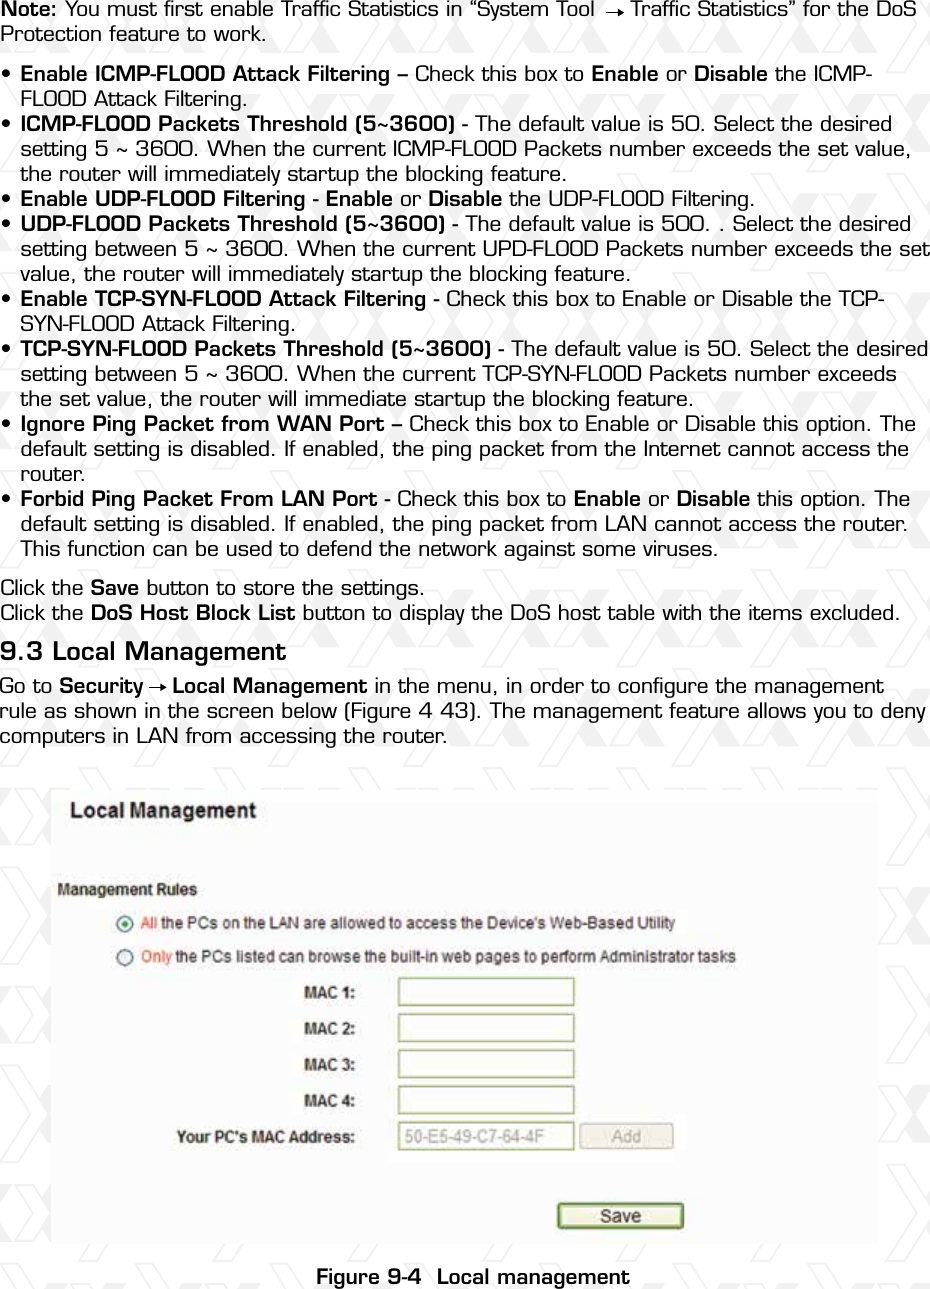 Nexxt Solutions – Wireless-N 3G router58Note: You must ﬁrst enable Trafﬁc Statistics in “System Tool     Trafﬁc Statistics” for the DoS Protection feature to work.Enable ICMP-FLOOD Attack Filtering – Check this box to Enable or Disable the ICMP-FLOOD Attack Filtering.ICMP-FLOOD Packets Threshold (5~3600) - The default value is 50. Select the desired setting 5 ~ 3600. When the current ICMP-FLOOD Packets number exceeds the set value, the router will immediately startup the blocking feature.Enable UDP-FLOOD Filtering - Enable or Disable the UDP-FLOOD Filtering.UDP-FLOOD Packets Threshold (5~3600) - The default value is 500. . Select the desired setting between 5 ~ 3600. When the current UPD-FLOOD Packets number exceeds the set value, the router will immediately startup the blocking feature.Enable TCP-SYN-FLOOD Attack Filtering - Check this box to Enable or Disable the TCP-SYN-FLOOD Attack Filtering.TCP-SYN-FLOOD Packets Threshold (5~3600) - The default value is 50. Select the desired setting between 5 ~ 3600. When the current TCP-SYN-FLOOD Packets number exceeds the set value, the router will immediate startup the blocking feature. Ignore Ping Packet from WAN Port – Check this box to Enable or Disable this option. The default setting is disabled. If enabled, the ping packet from the Internet cannot access the router. Forbid Ping Packet From LAN Port - Check this box to Enable or Disable this option. The default setting is disabled. If enabled, the ping packet from LAN cannot access the router. This function can be used to defend the network against some viruses. Click the Save button to store the settings.Click the DoS Host Block List button to display the DoS host table with the items excluded. Go to Security    Local Management in the menu, in order to conﬁgure the management rule as shown in the screen below (Figure 4 43). The management feature allows you to deny computers in LAN from accessing the router.9.3 Local Management••••••••Figure 9-4  Local management